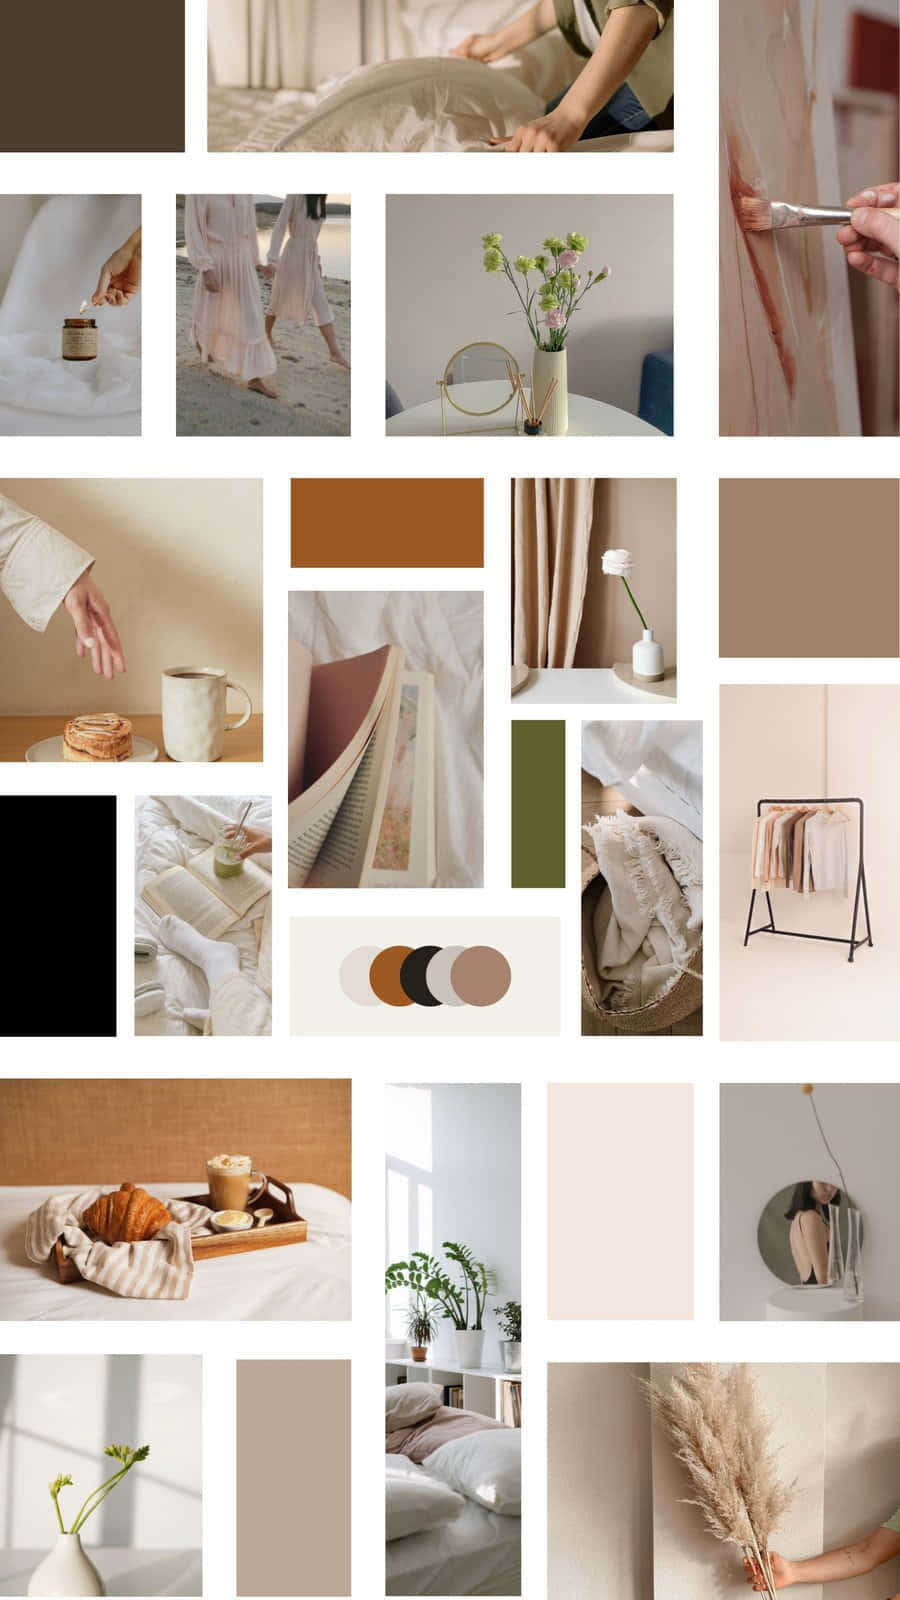 Relax, Restore and Rejuvenate with Aesthetic Moodboard Wallpaper